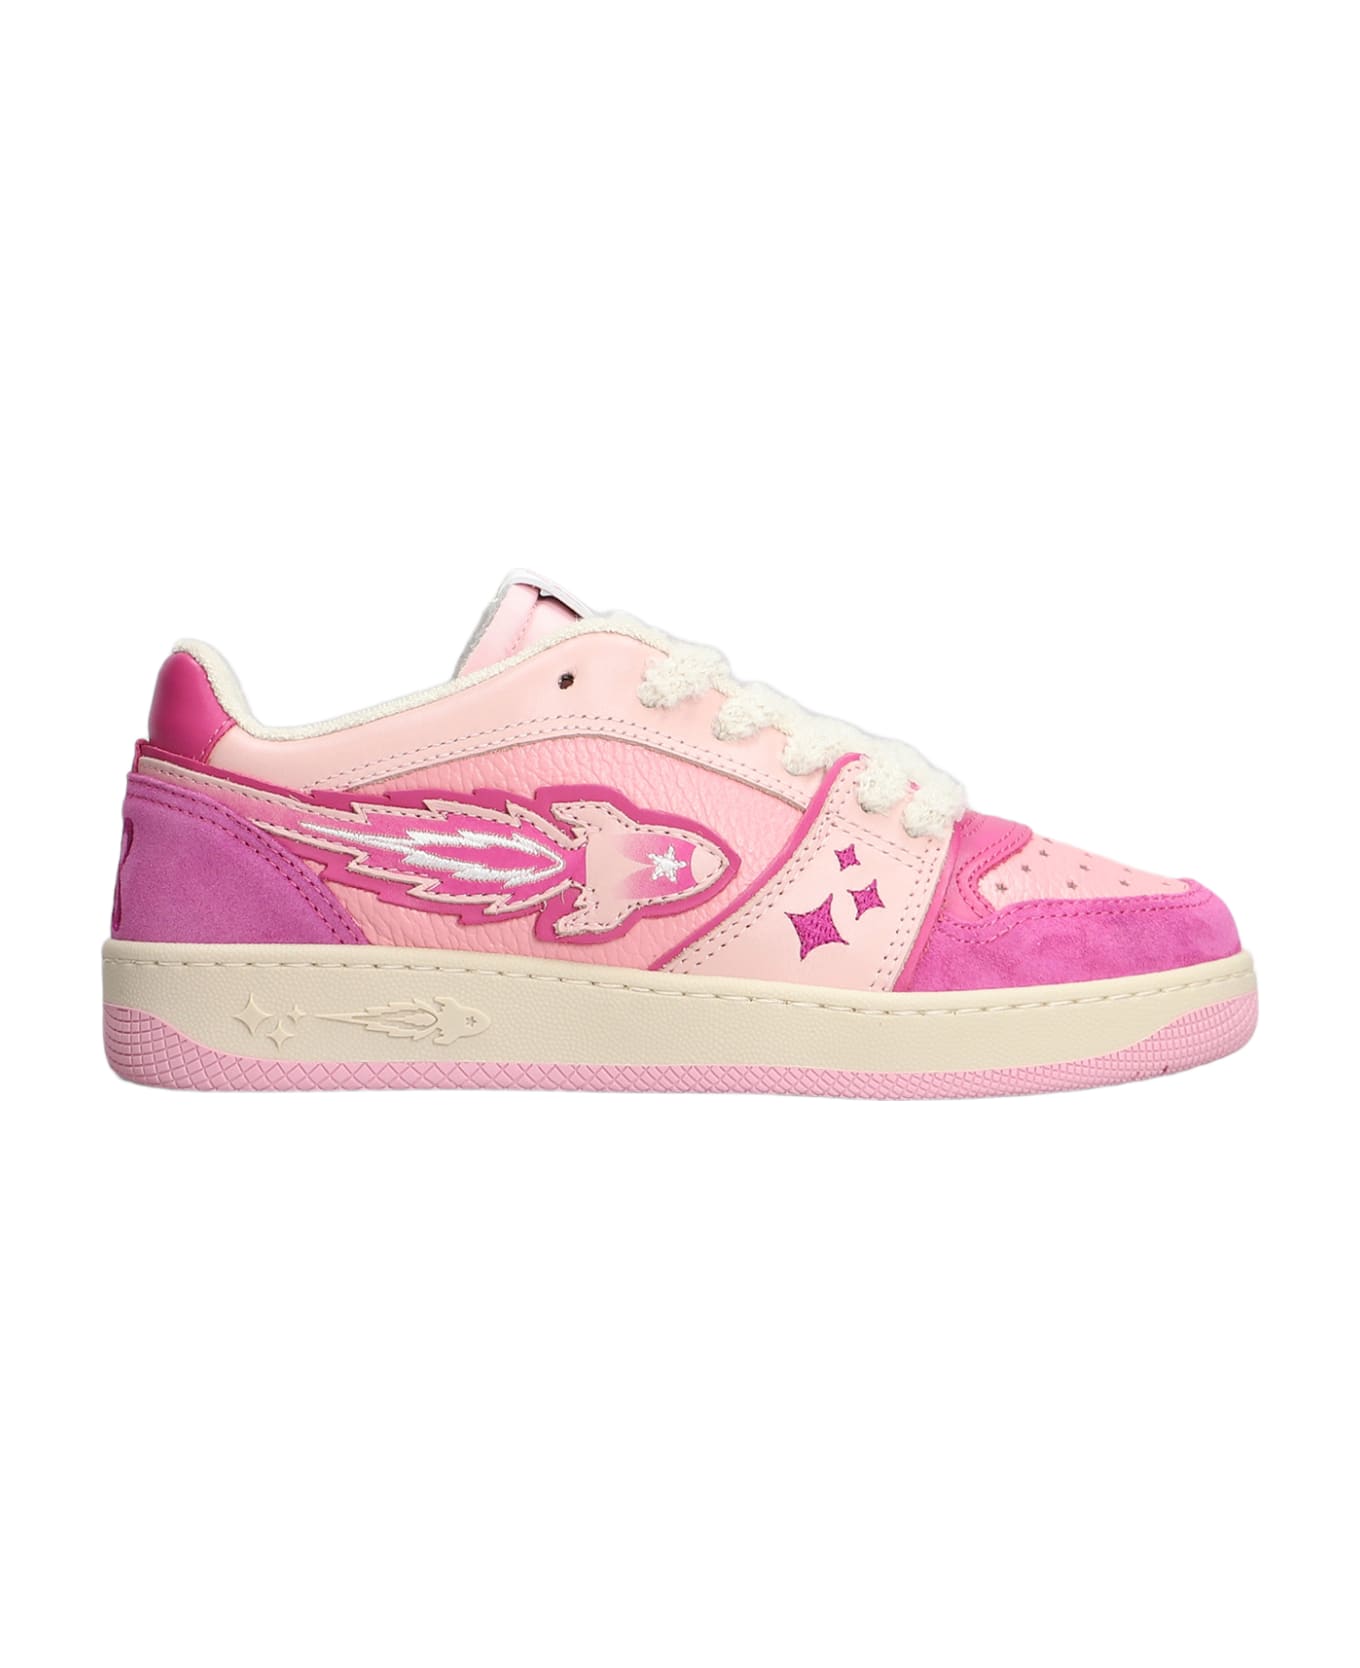 Enterprise Japan Sneakers In Rose-pink Suede And Leather - rose-pink スニーカー